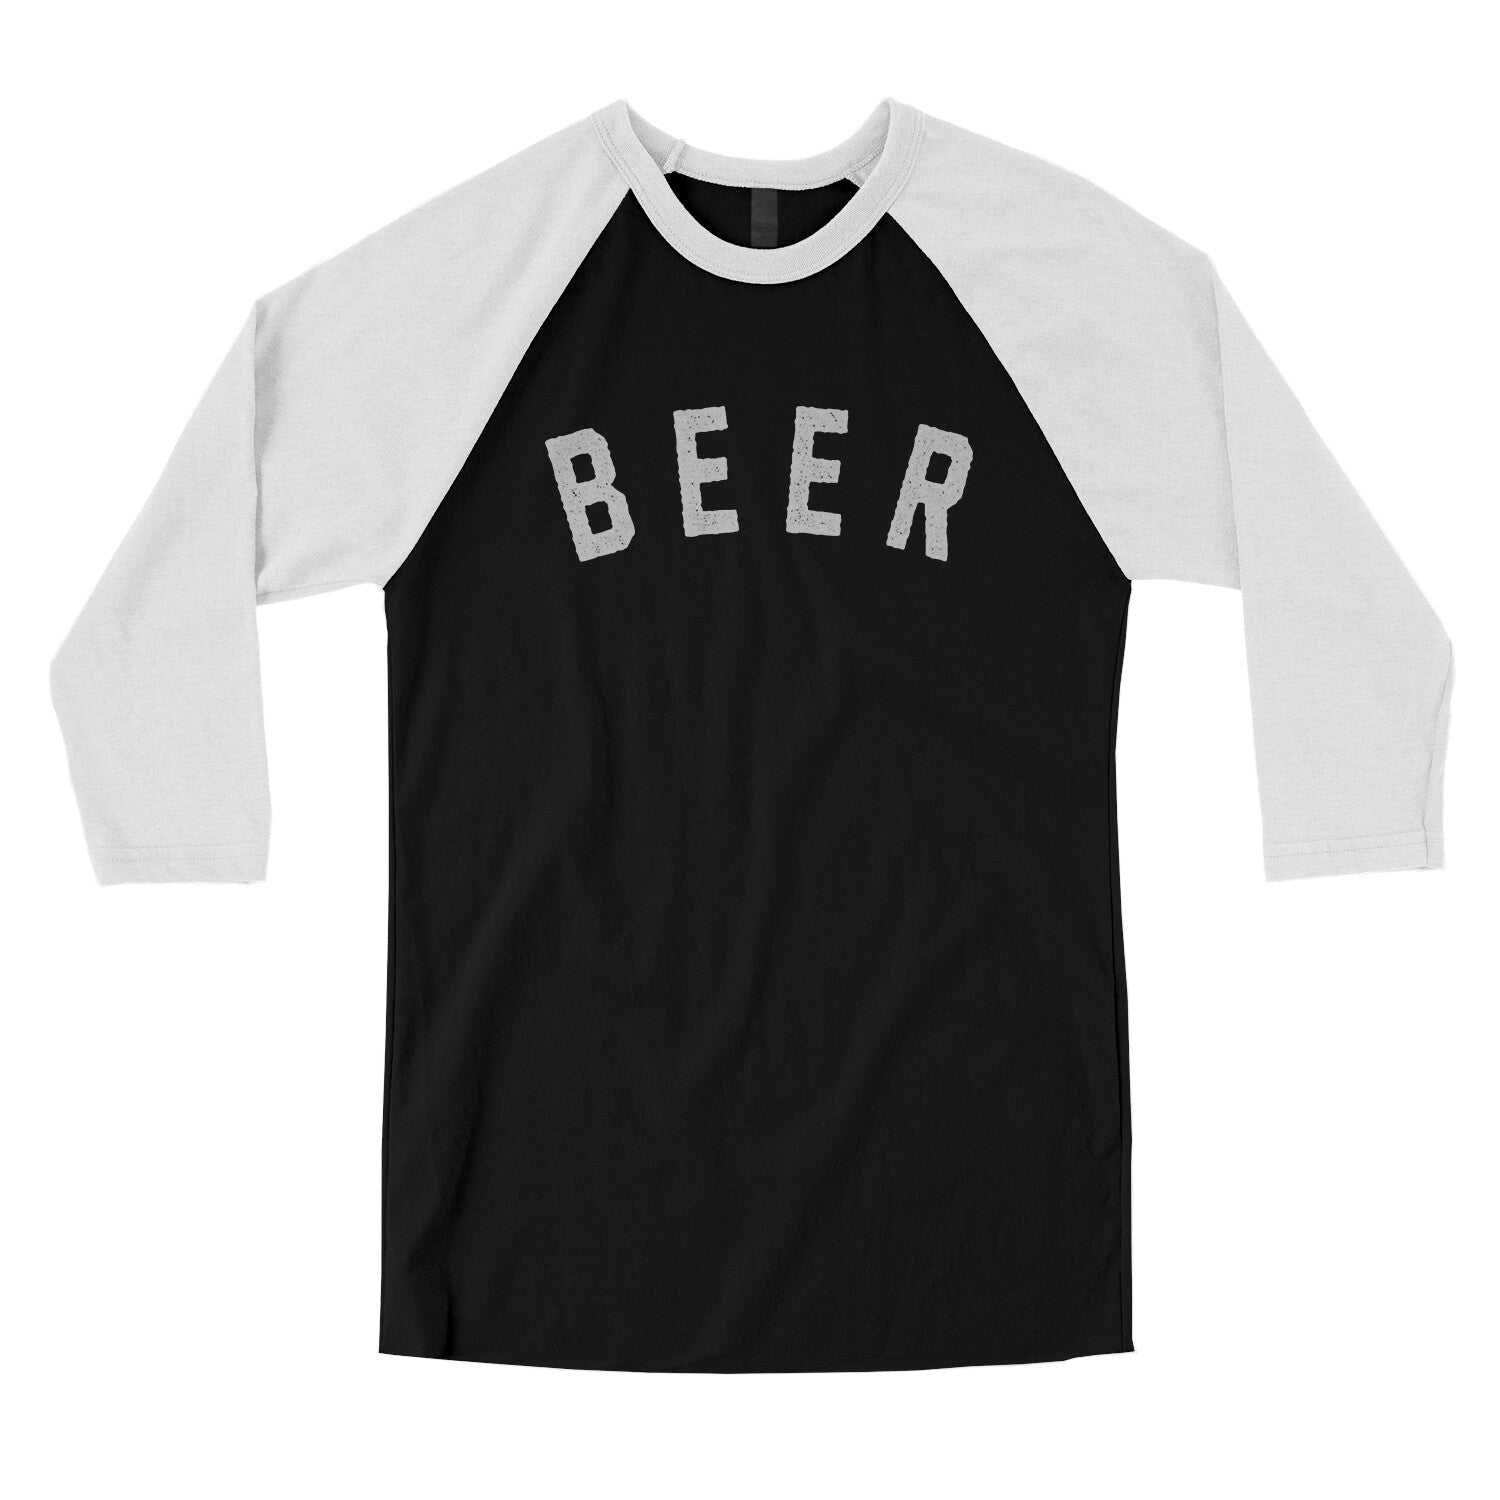 Beer in Black with White Color